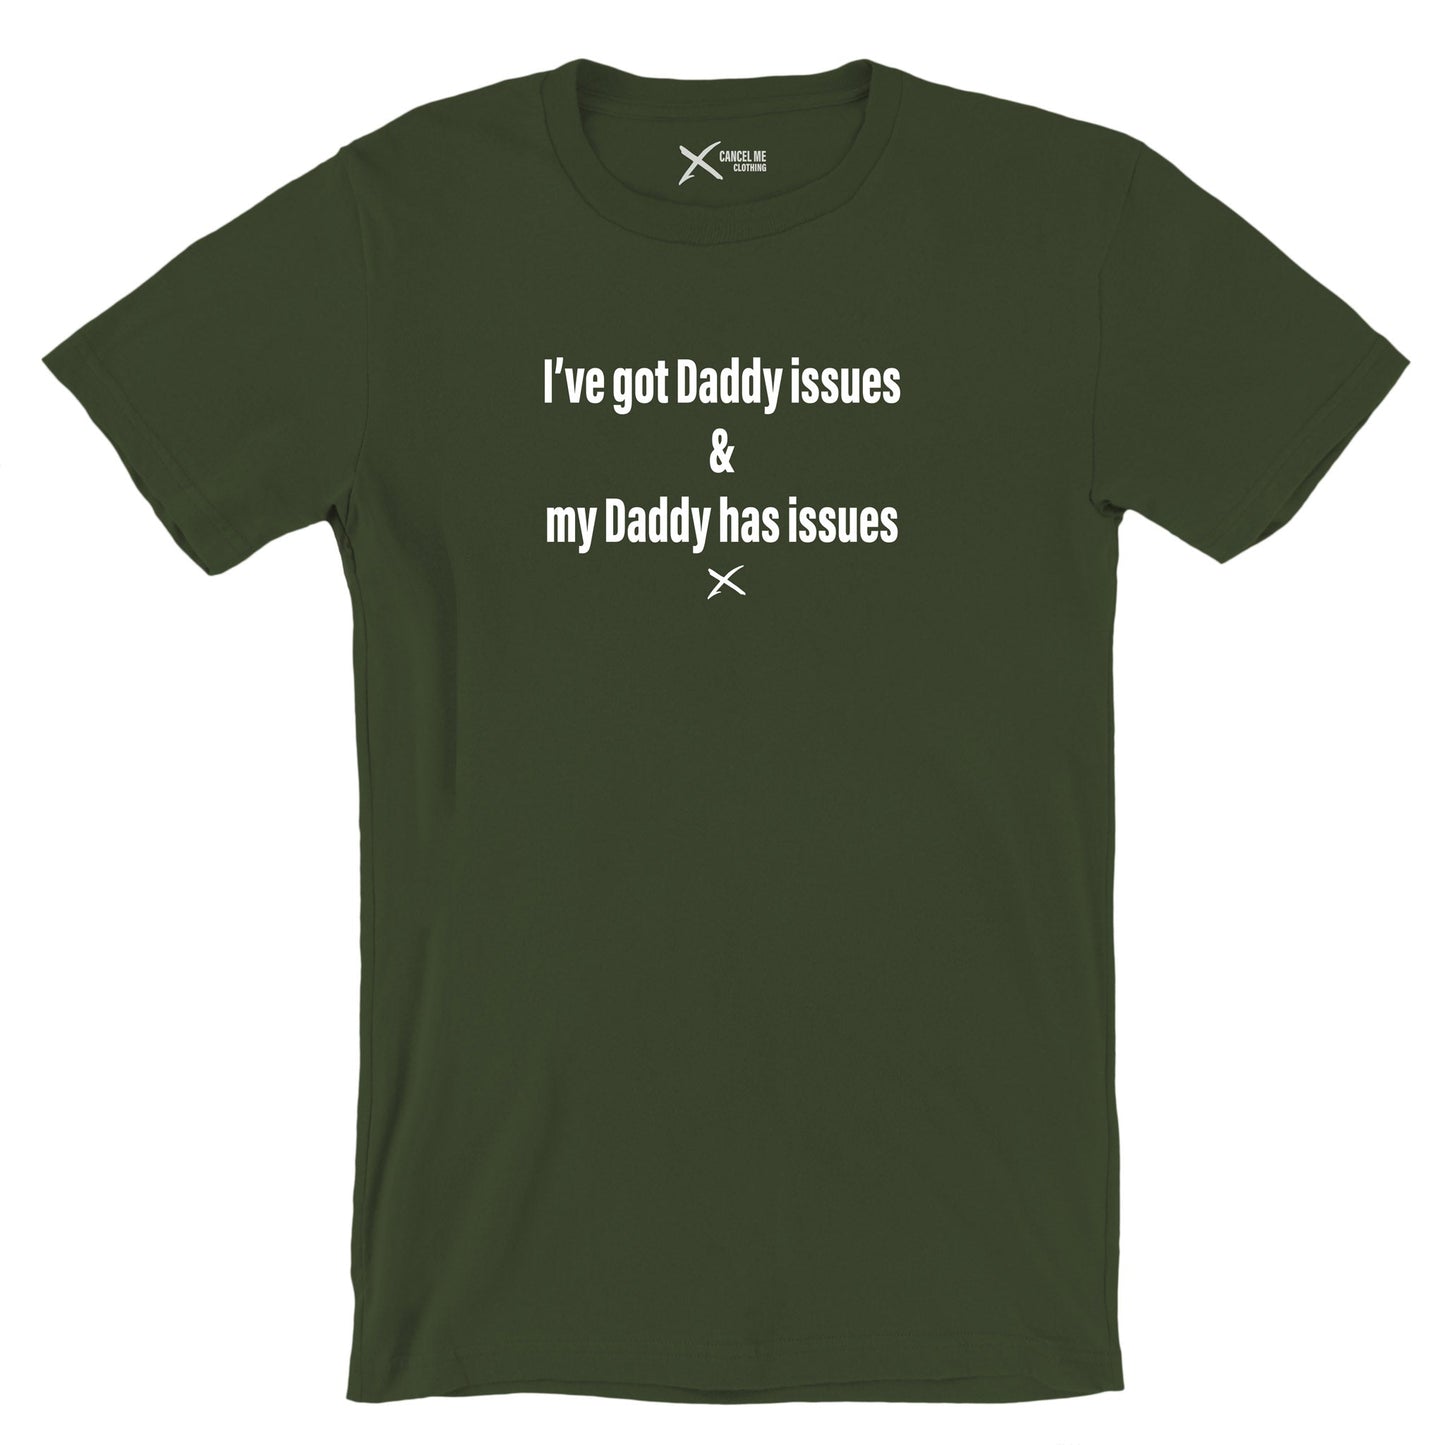 I've got Daddy issues & my Daddy has issues - Shirt